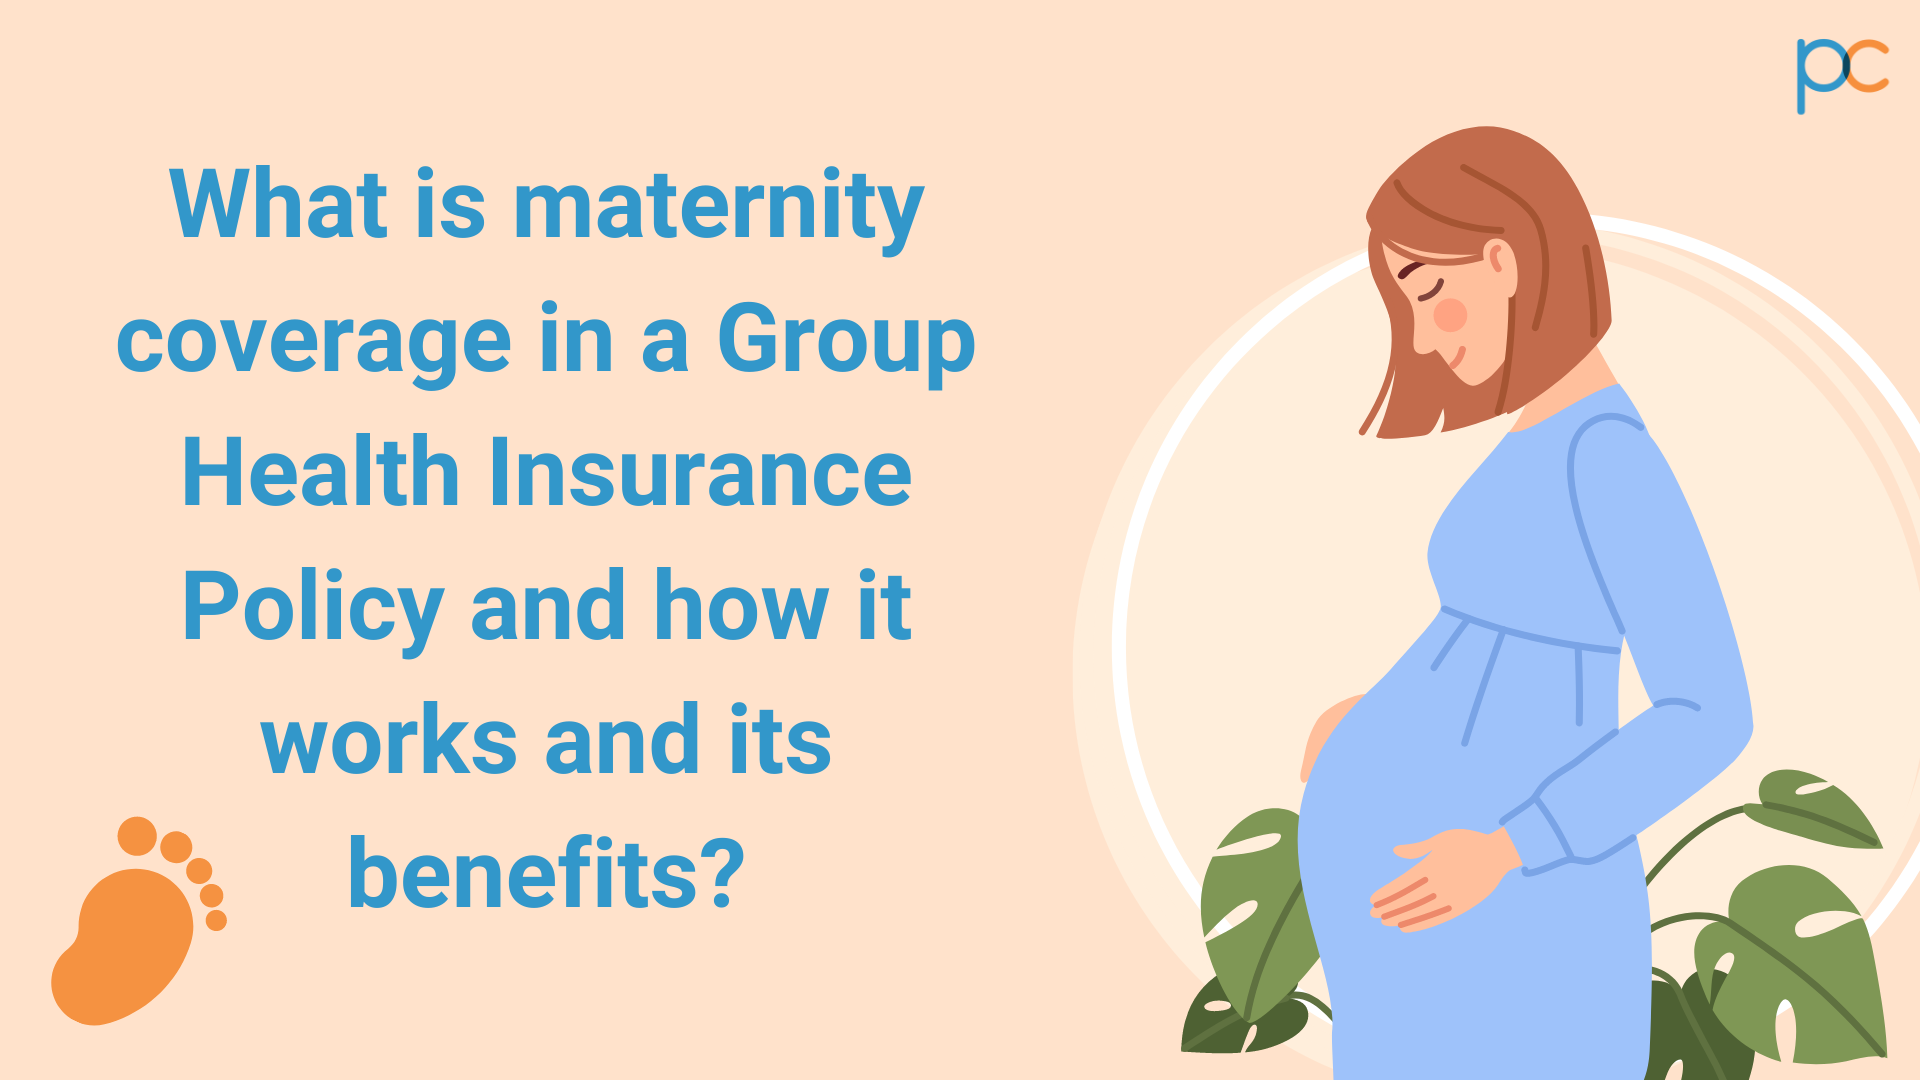 https://www.plancover.com/insurance/wp-content/uploads/2021/12/What-is-maternity-coverage-in-a-Group-Health-Insurance-Policy-and-how-it-works-and-its-benefits-1.png